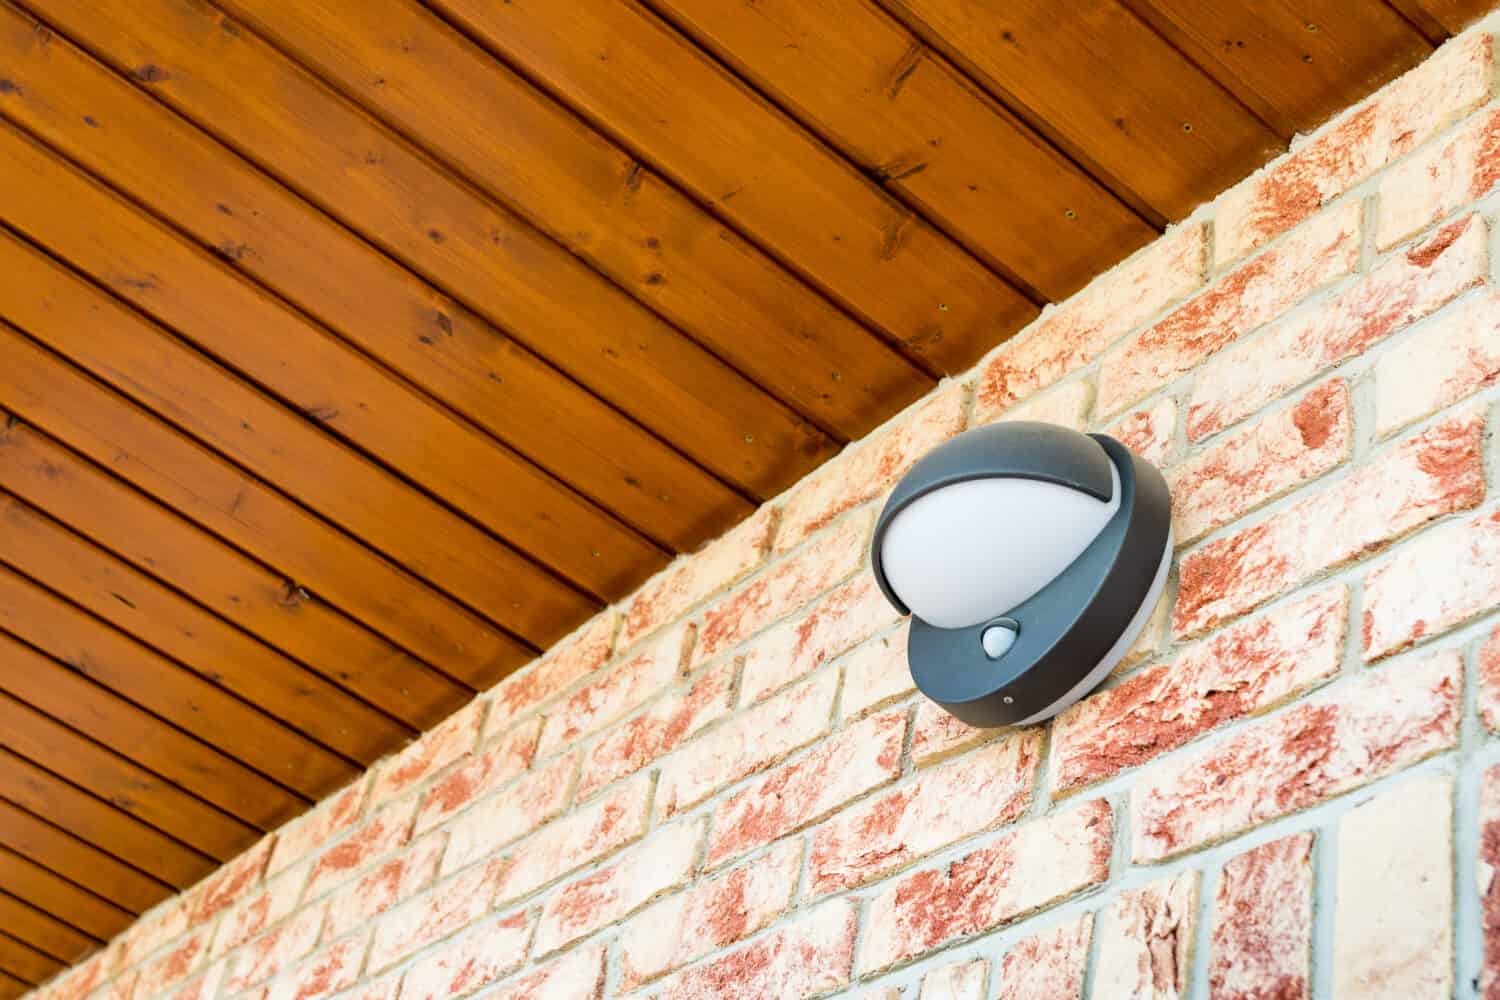 Modern wall lamp with motion and light sensor on the brick wall - pathway or wall light for modern design building or house - motion activated porch light - part of home security system